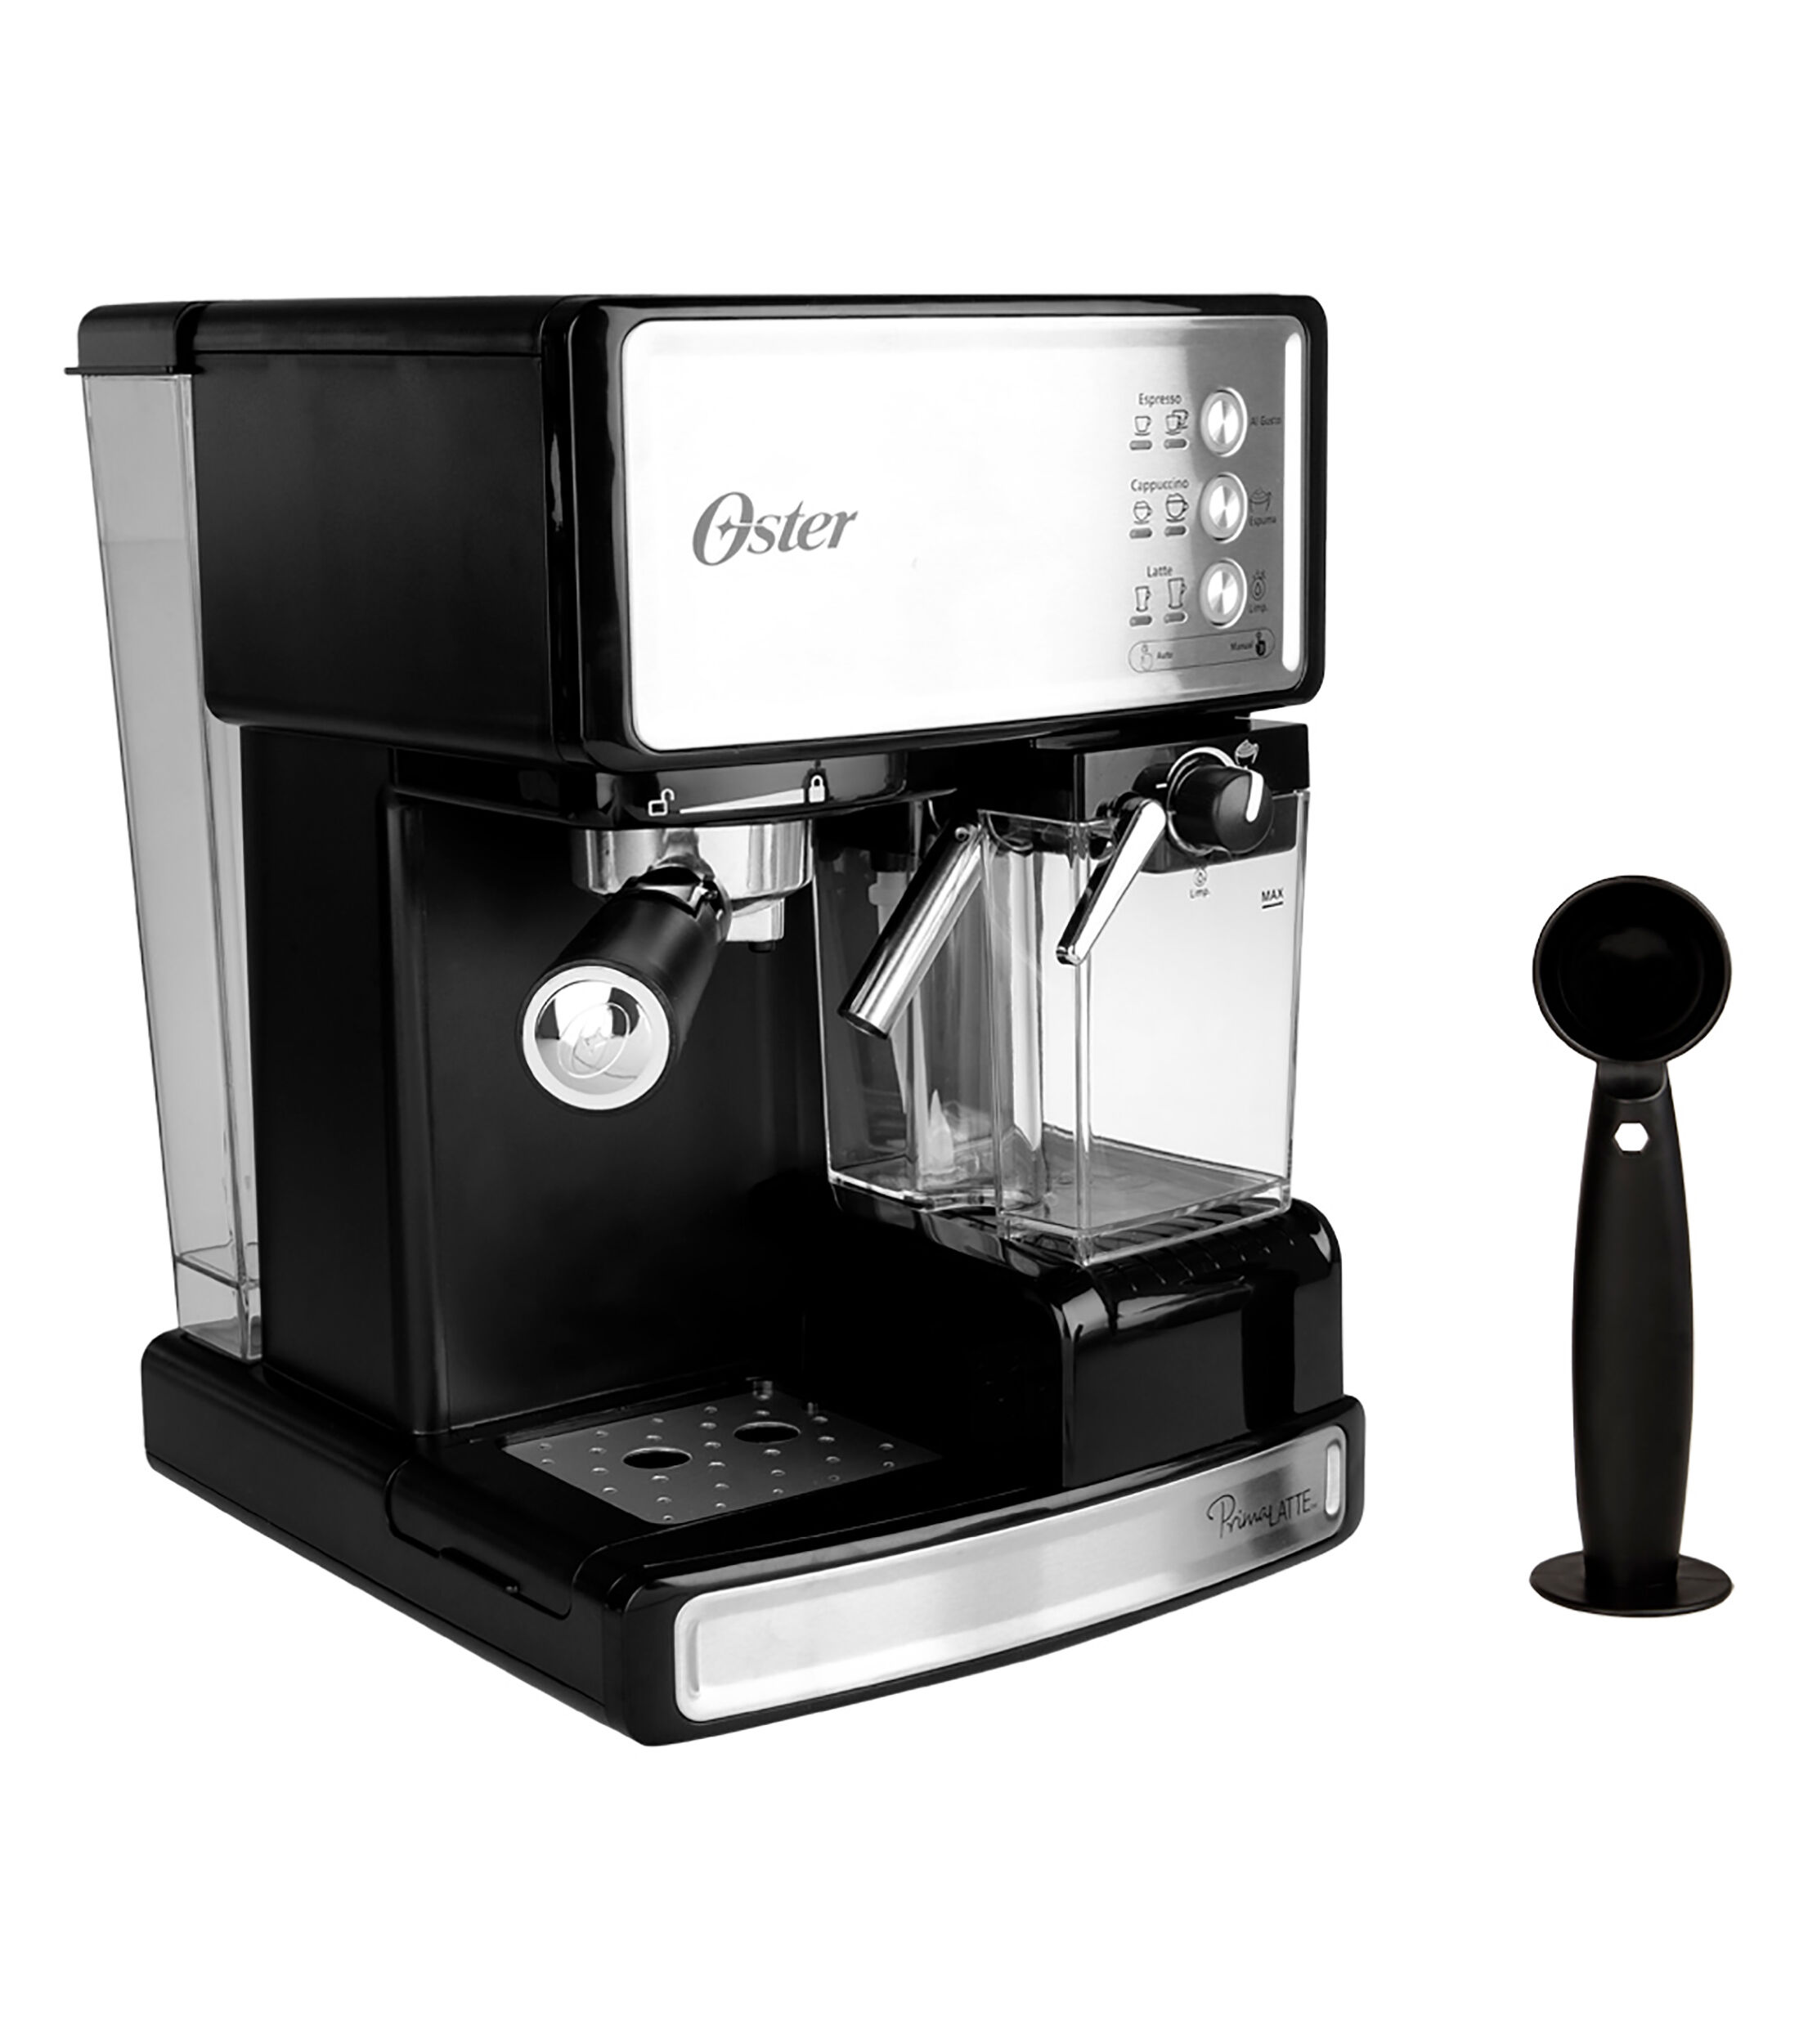 cafetera oster 3216 manual